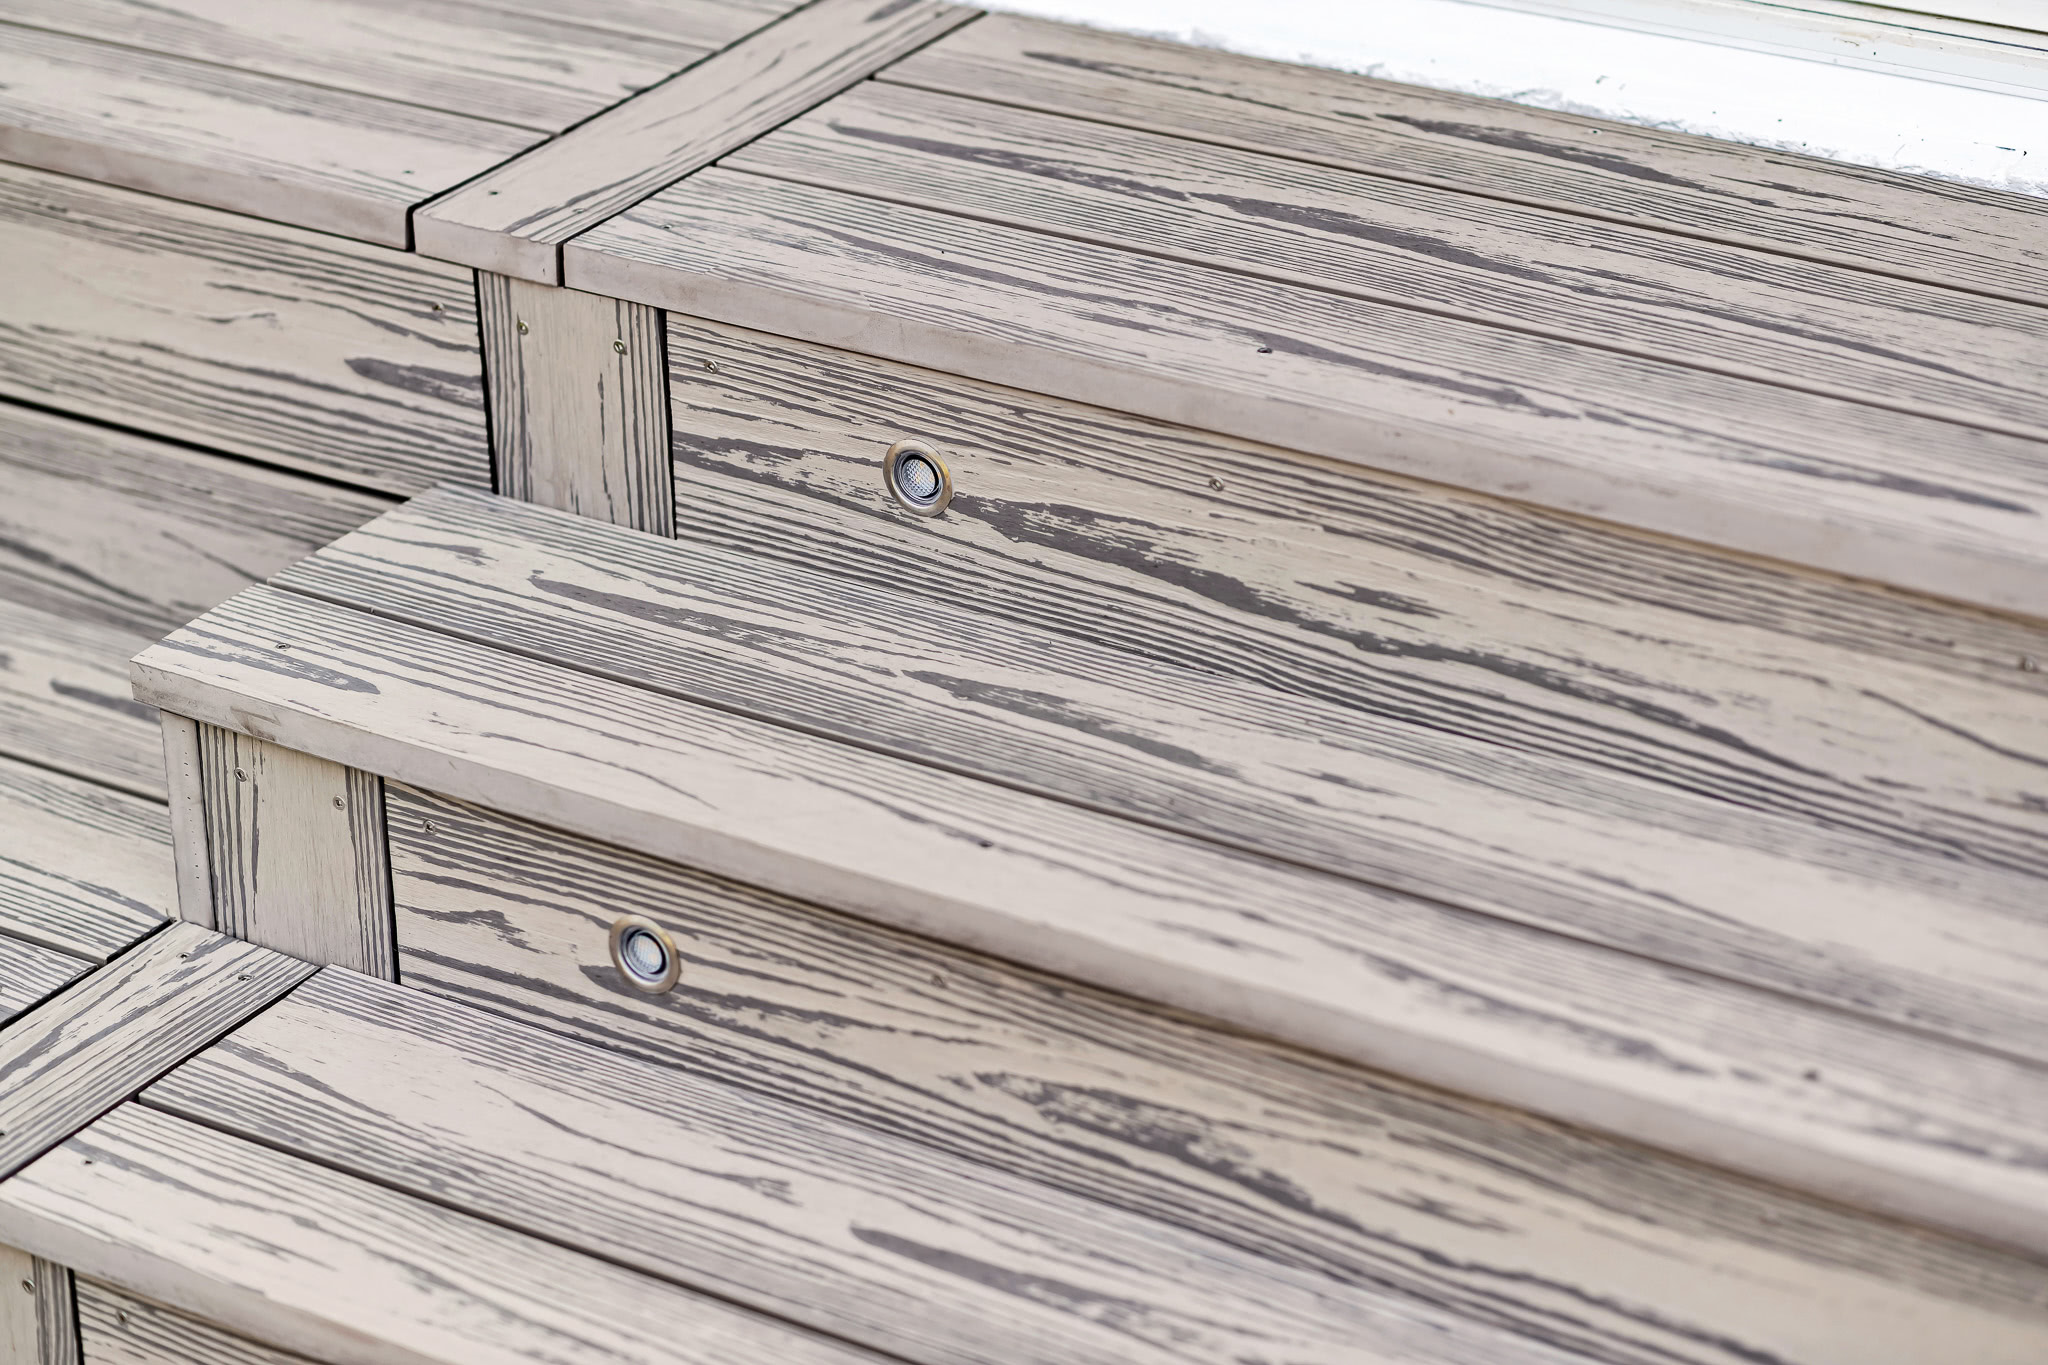 A close up view of brite composite decking stairs